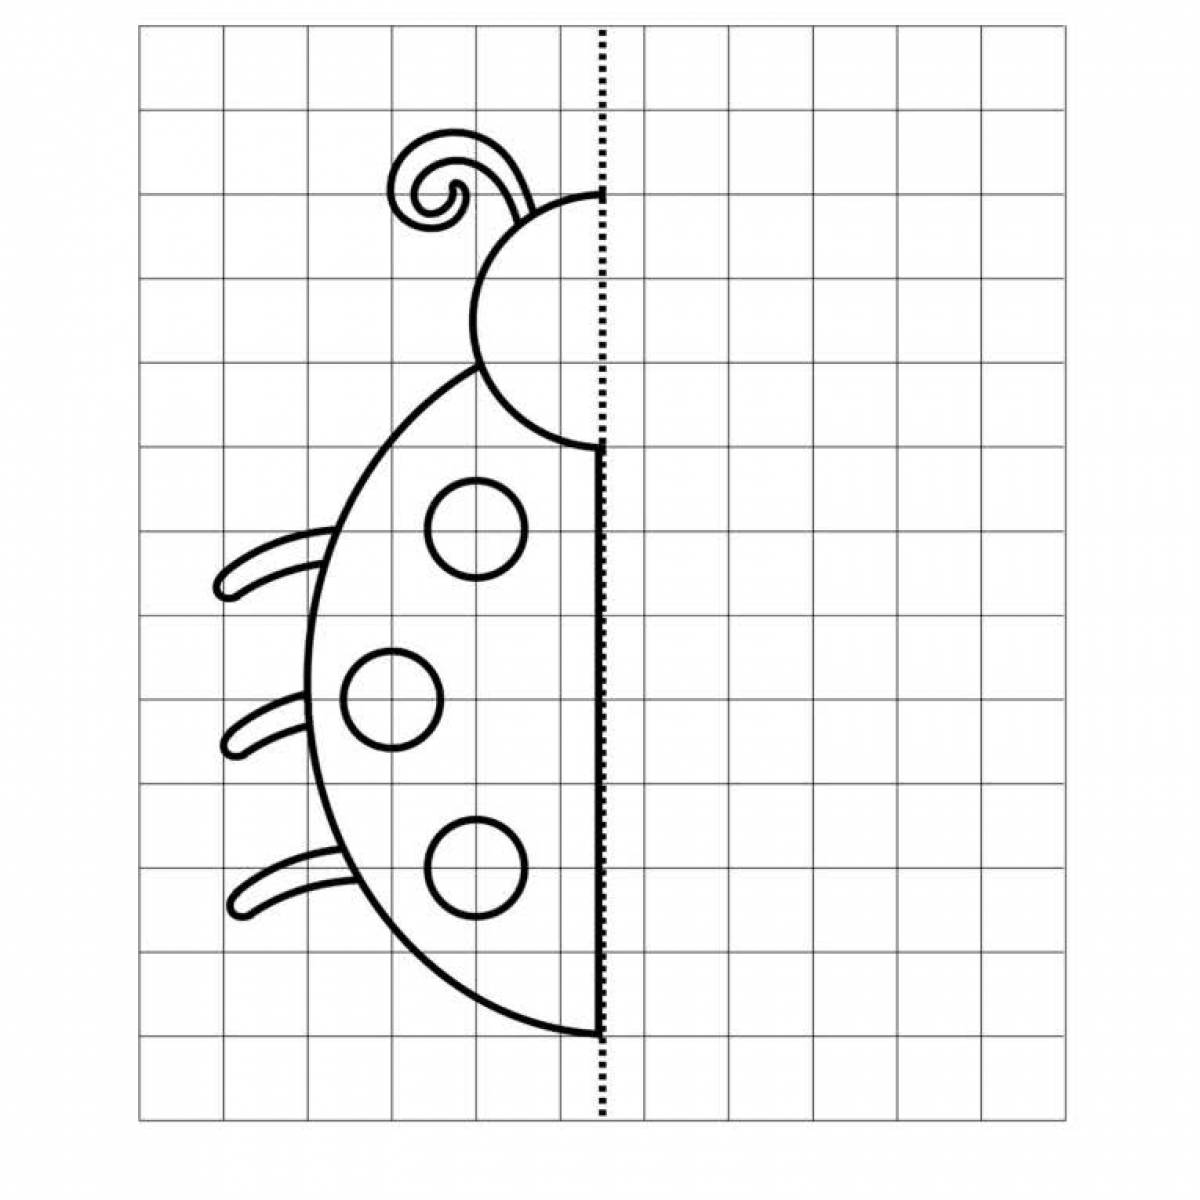 Draw the ladybug in the cells